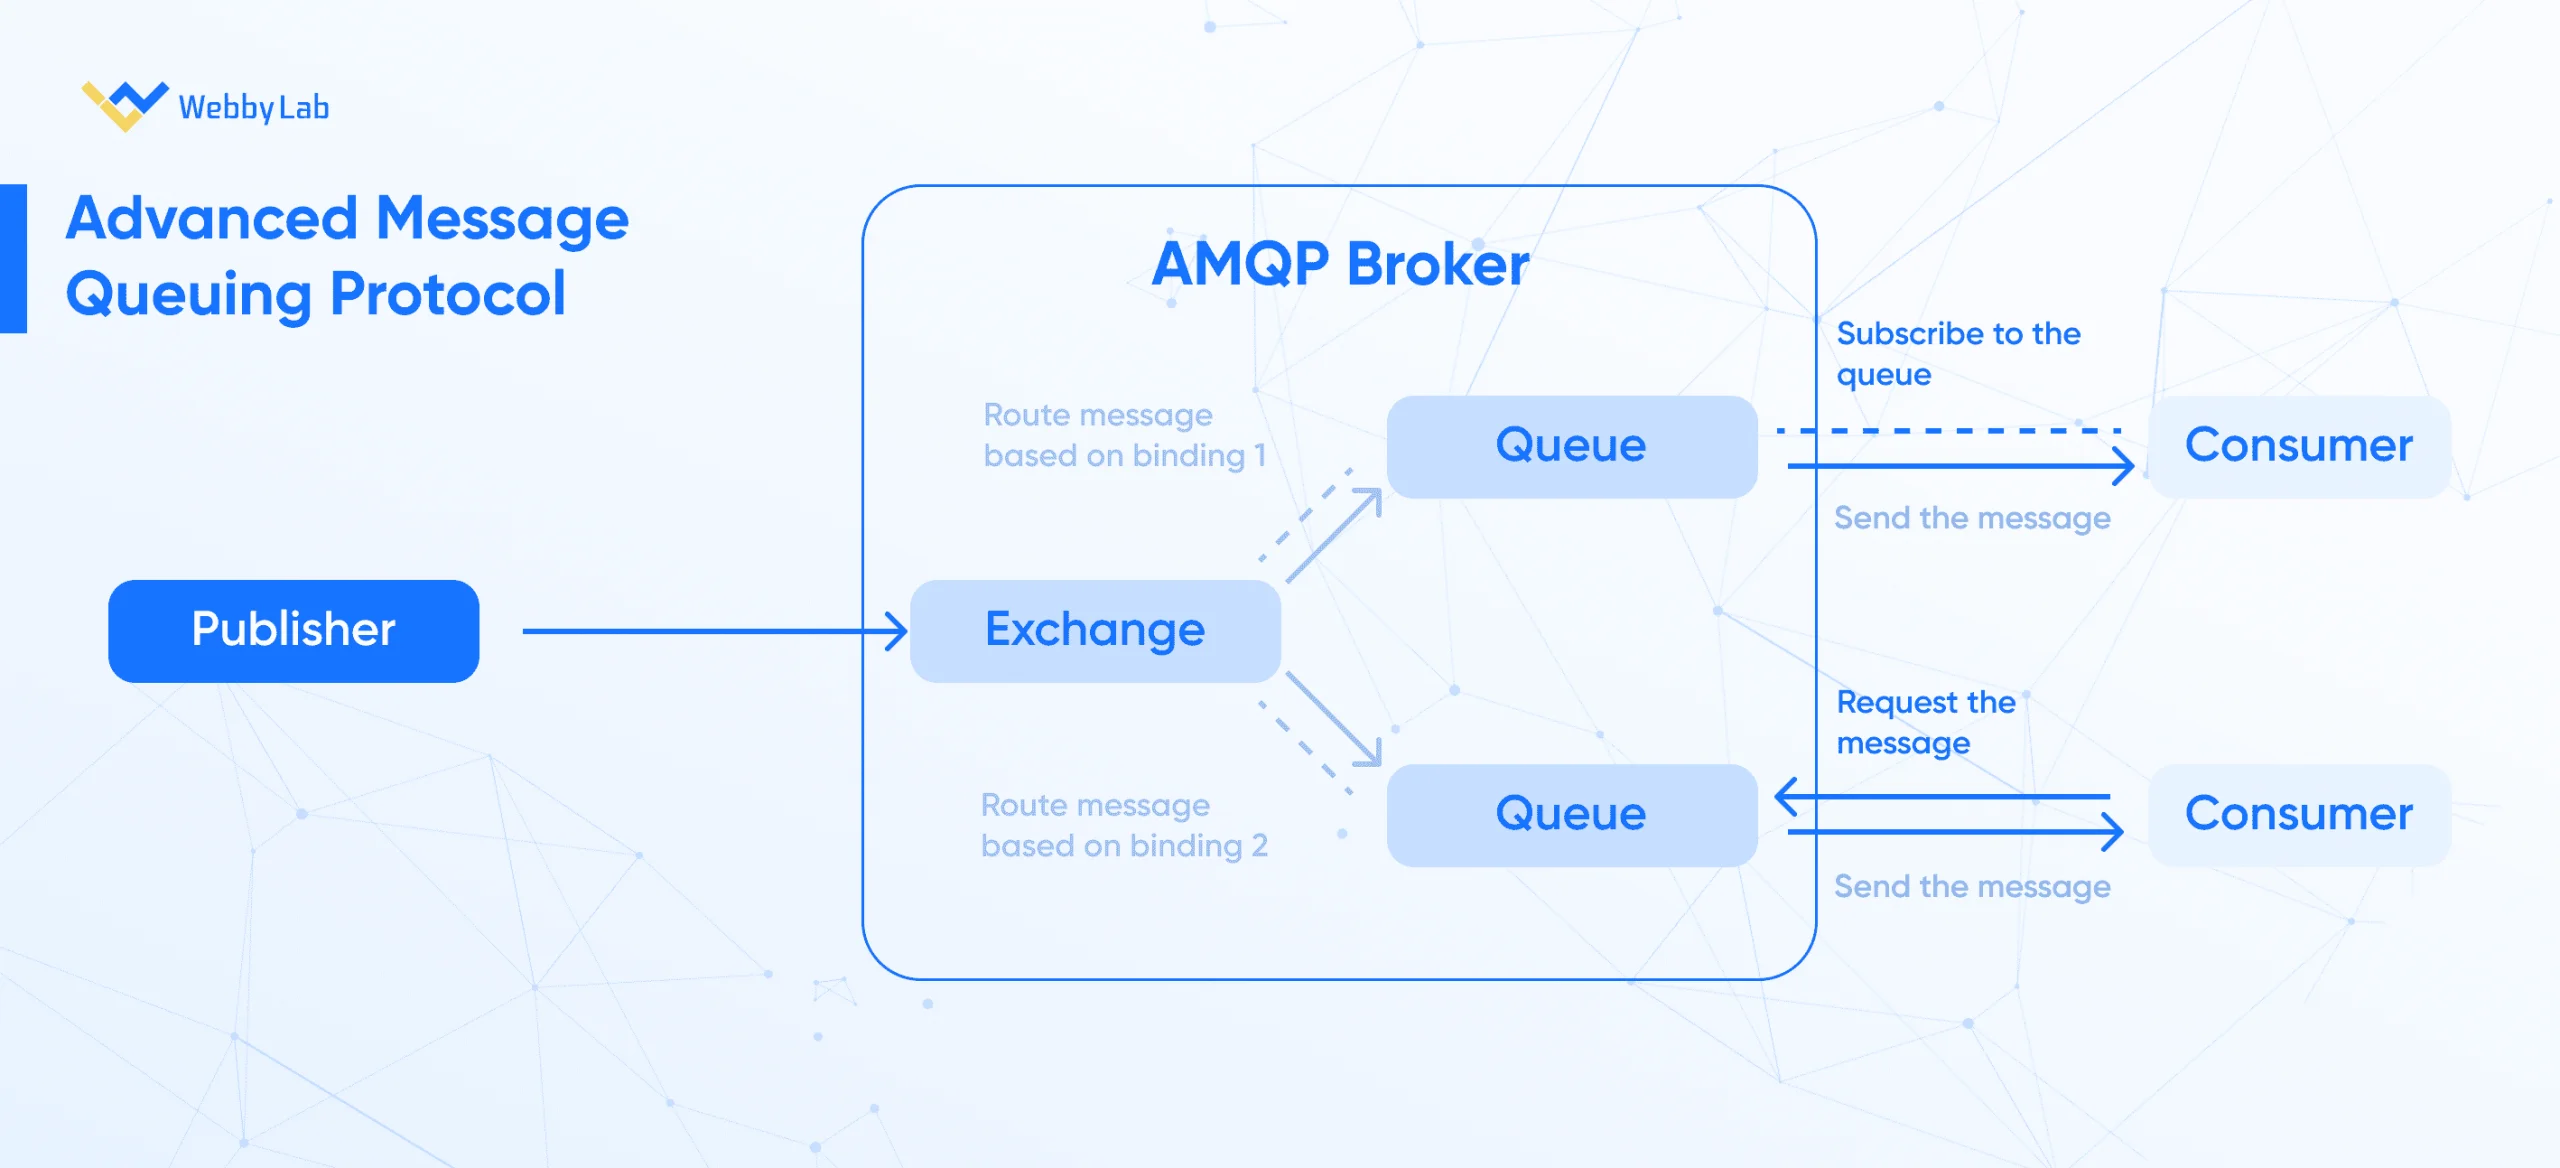  A publish-consume messaging scenario of the AMQP broker. 